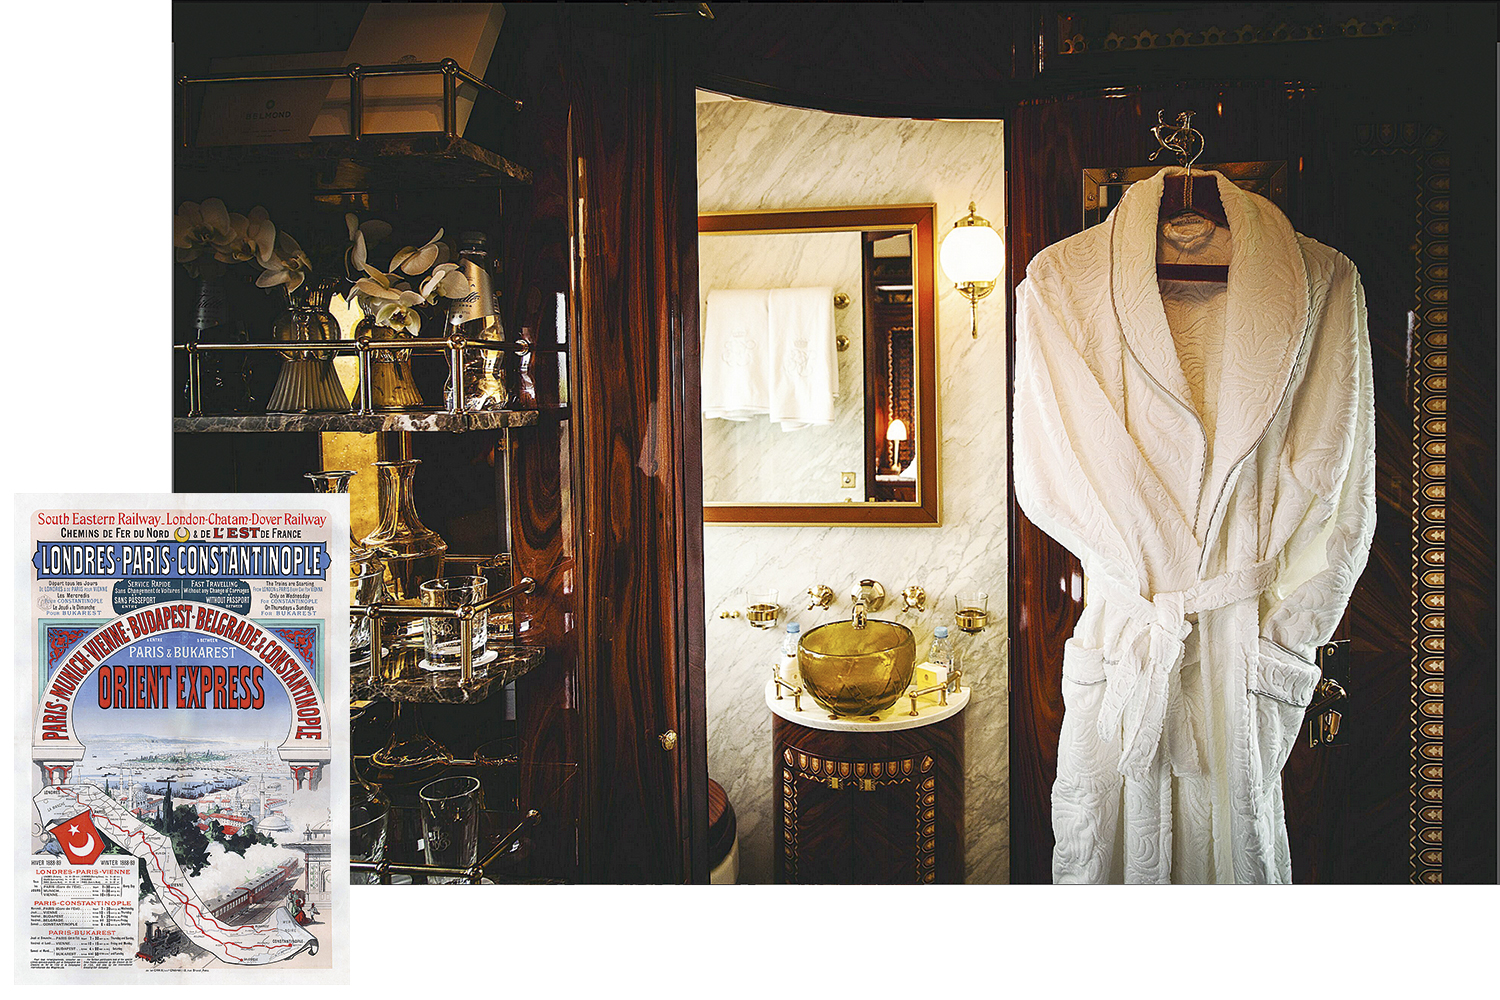 RETURN TO GLAMOR - The luxurious cabin of the mythical Orient Express today and the old ticket: the 